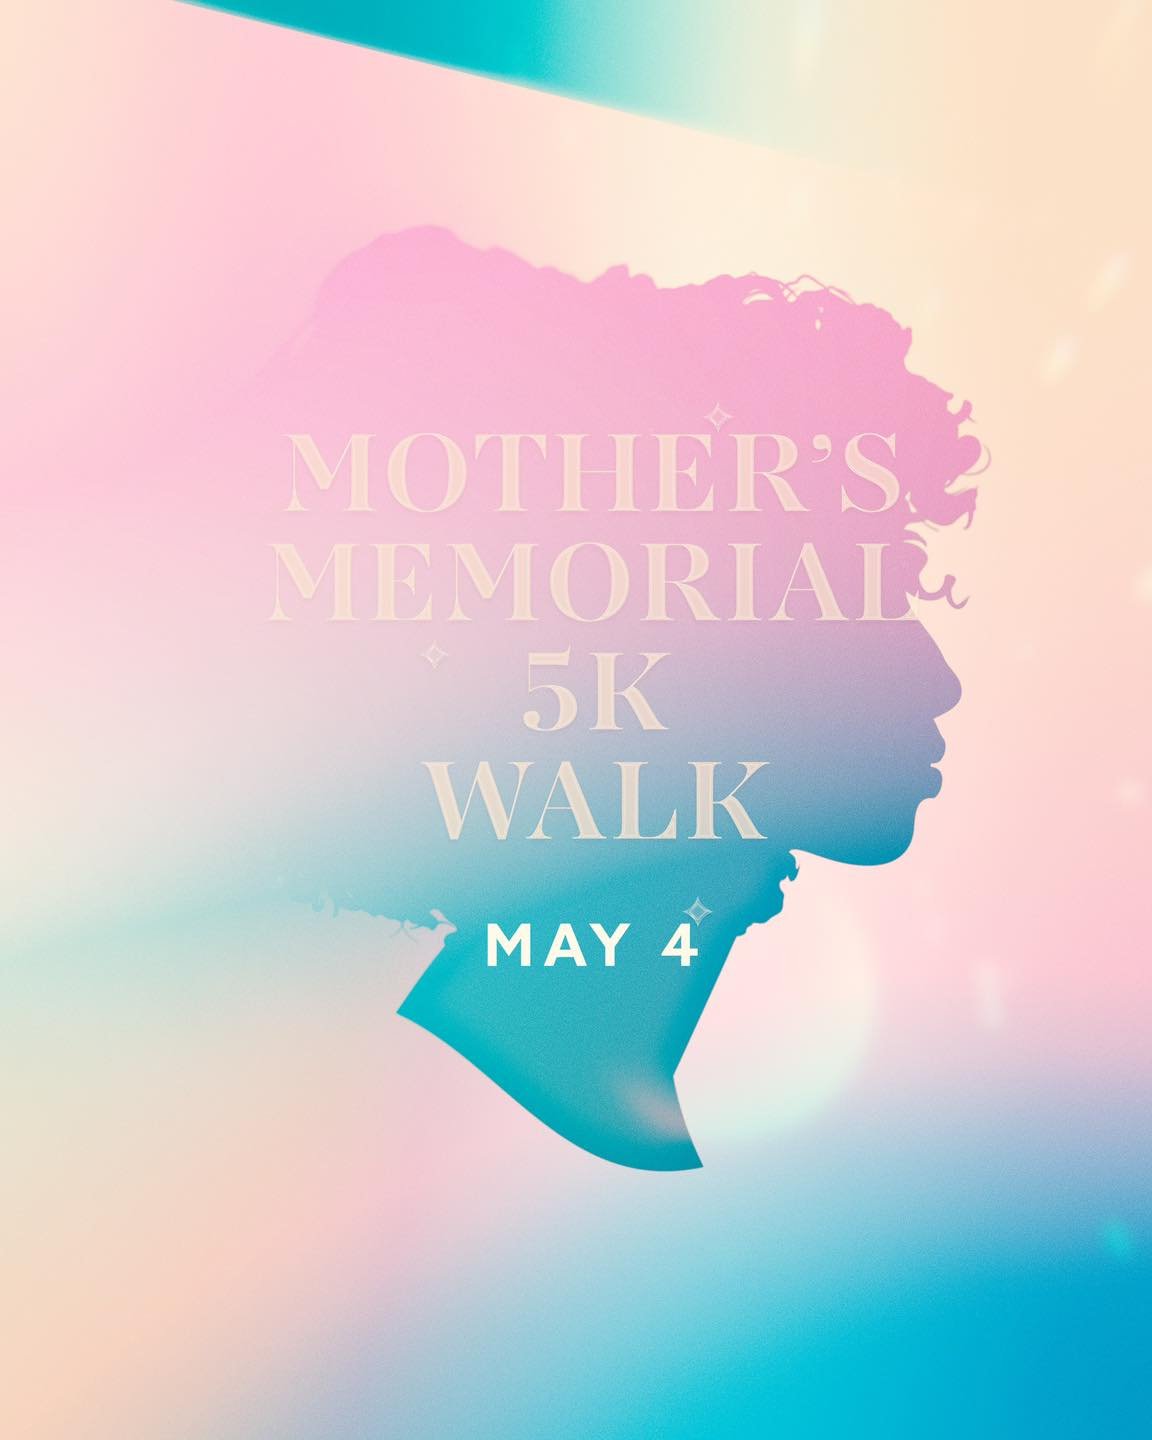 There will be a Mother&rsquo;s Memorial 5K walk this Saturday, at 10 AM, here at the church. If you would like to purchase a shirt for $15, please sign up this Wednesday at the information desk. 💖